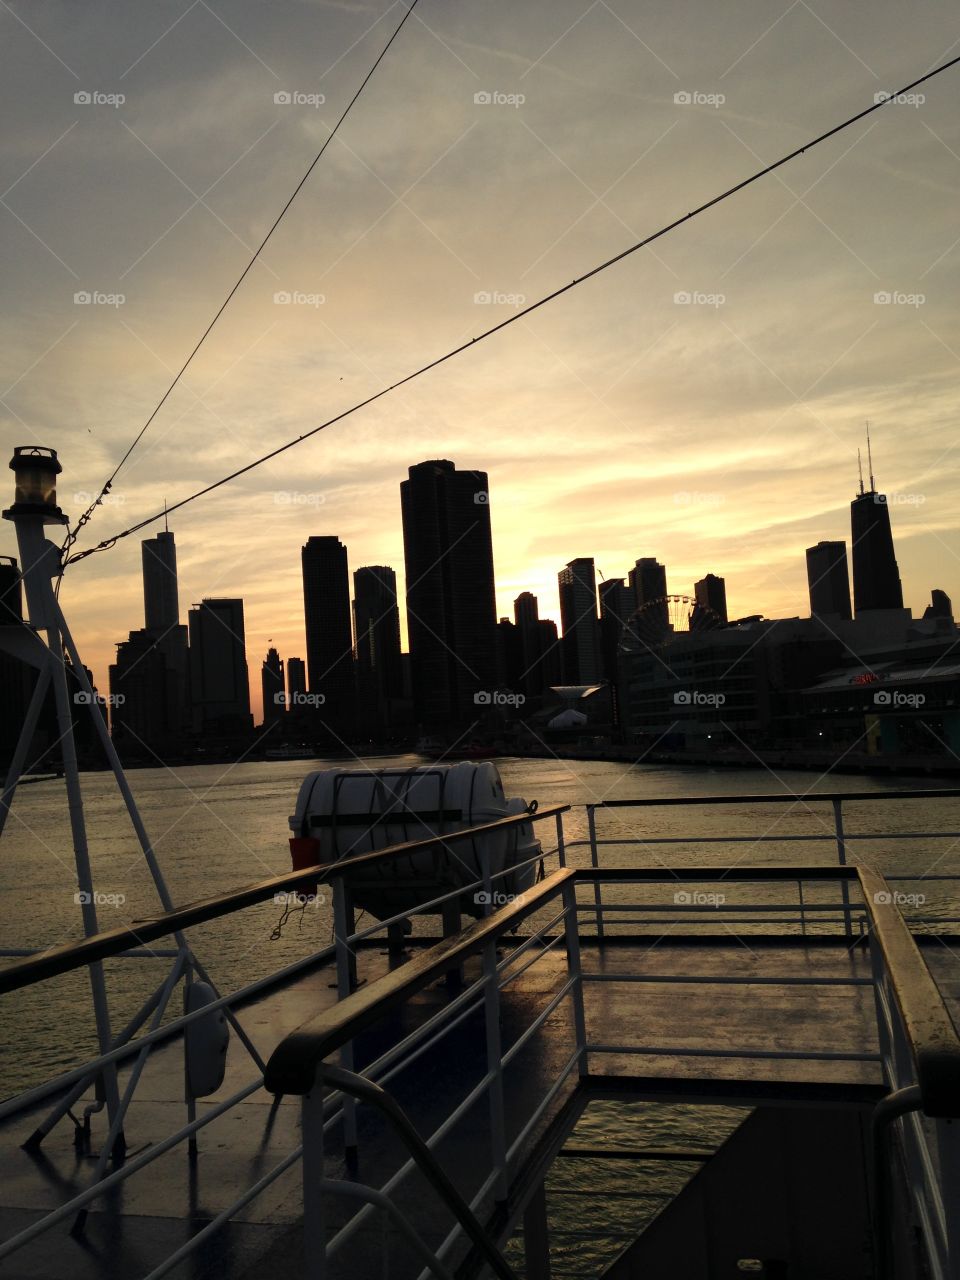 Chicago sunset behind the skyline. Taken while on "The Spirit of Chicago".